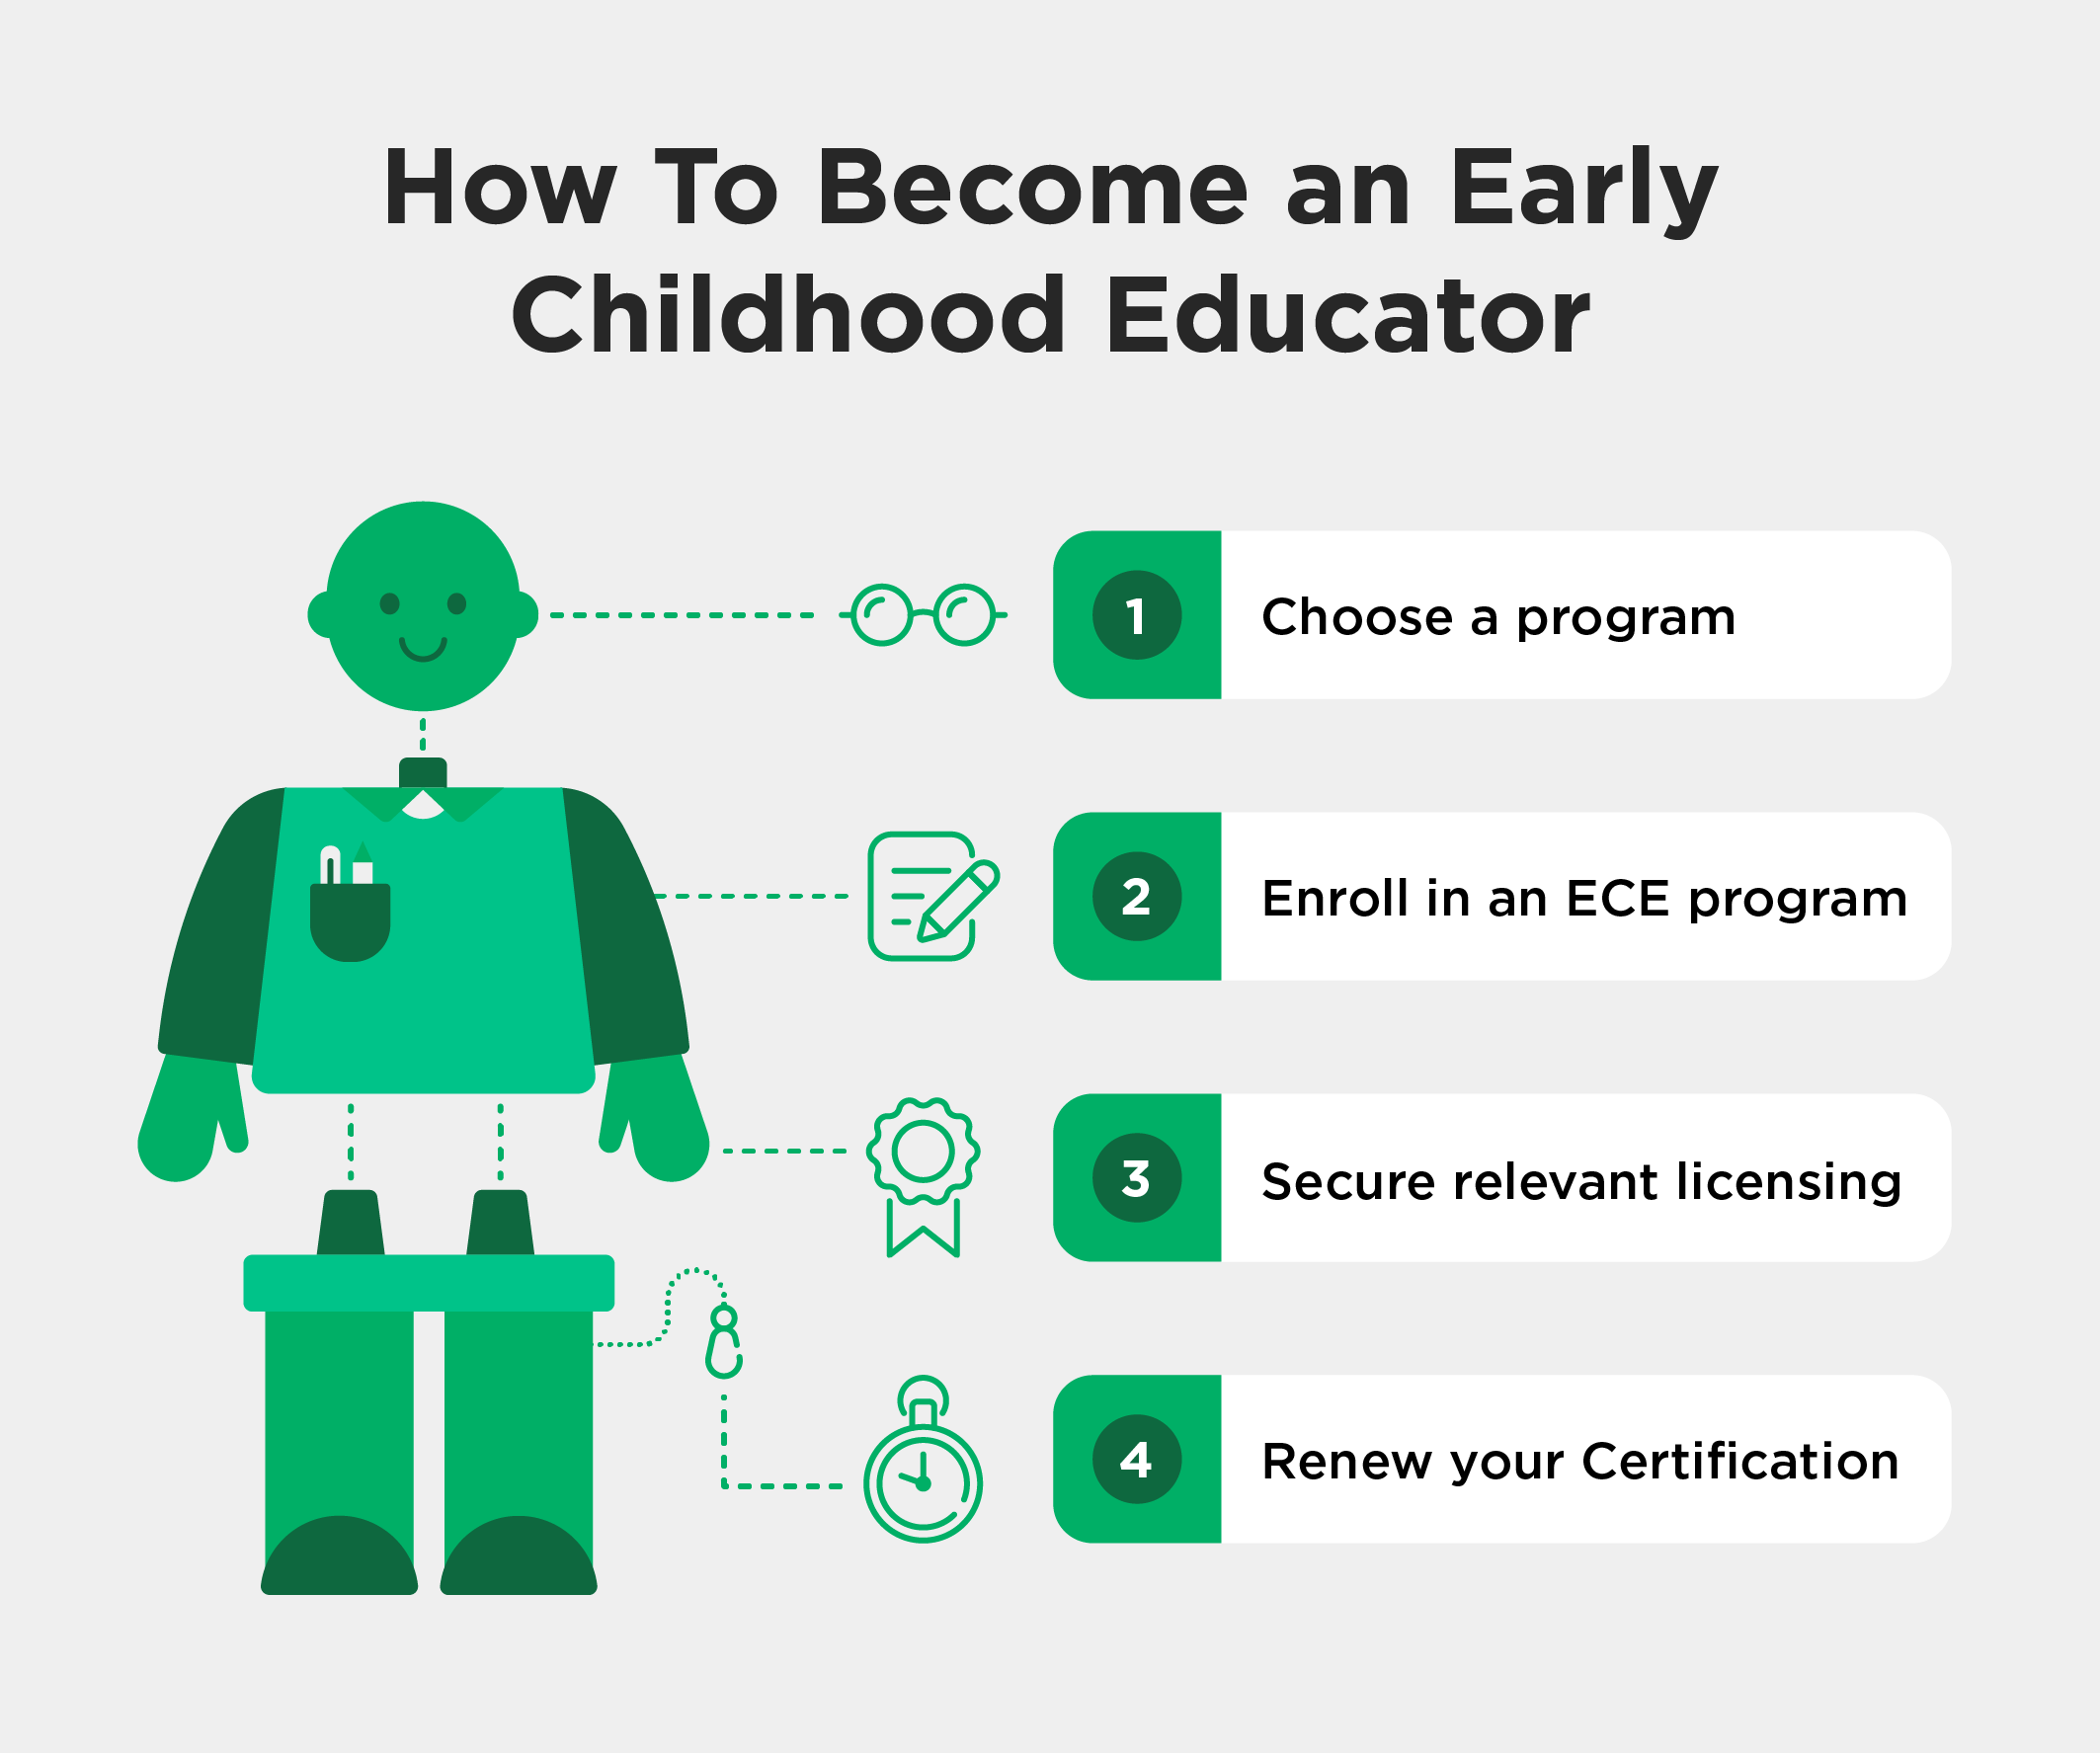 Illustration of an ECE alongside steps to becoming an early childhood educator.